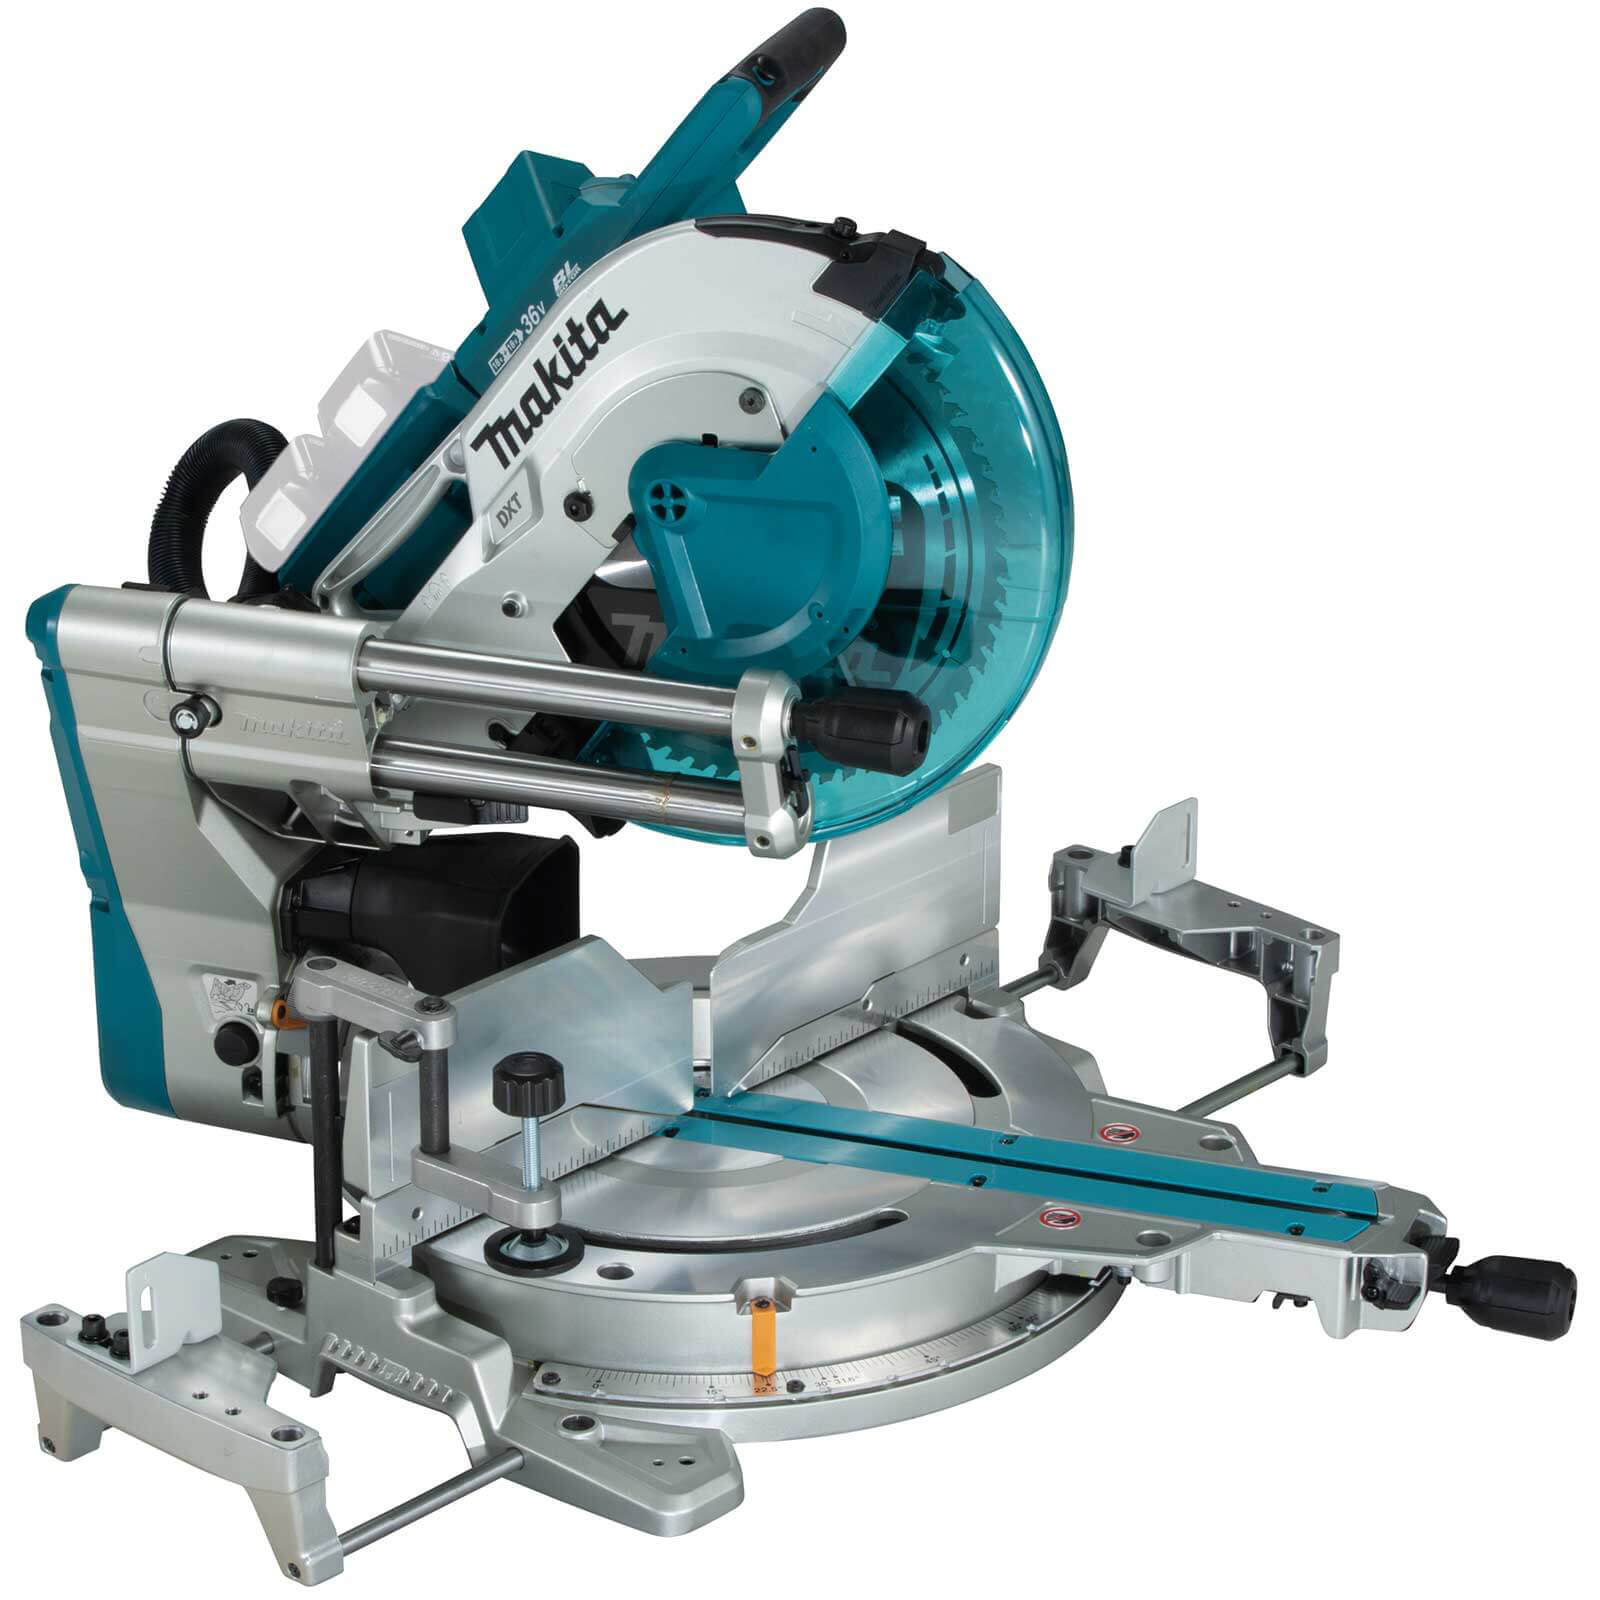 Image of Makita DLS211 Twin 18v LXT Cordless Brushless Mitre Saw 305mm No Batteries No Charger No Case